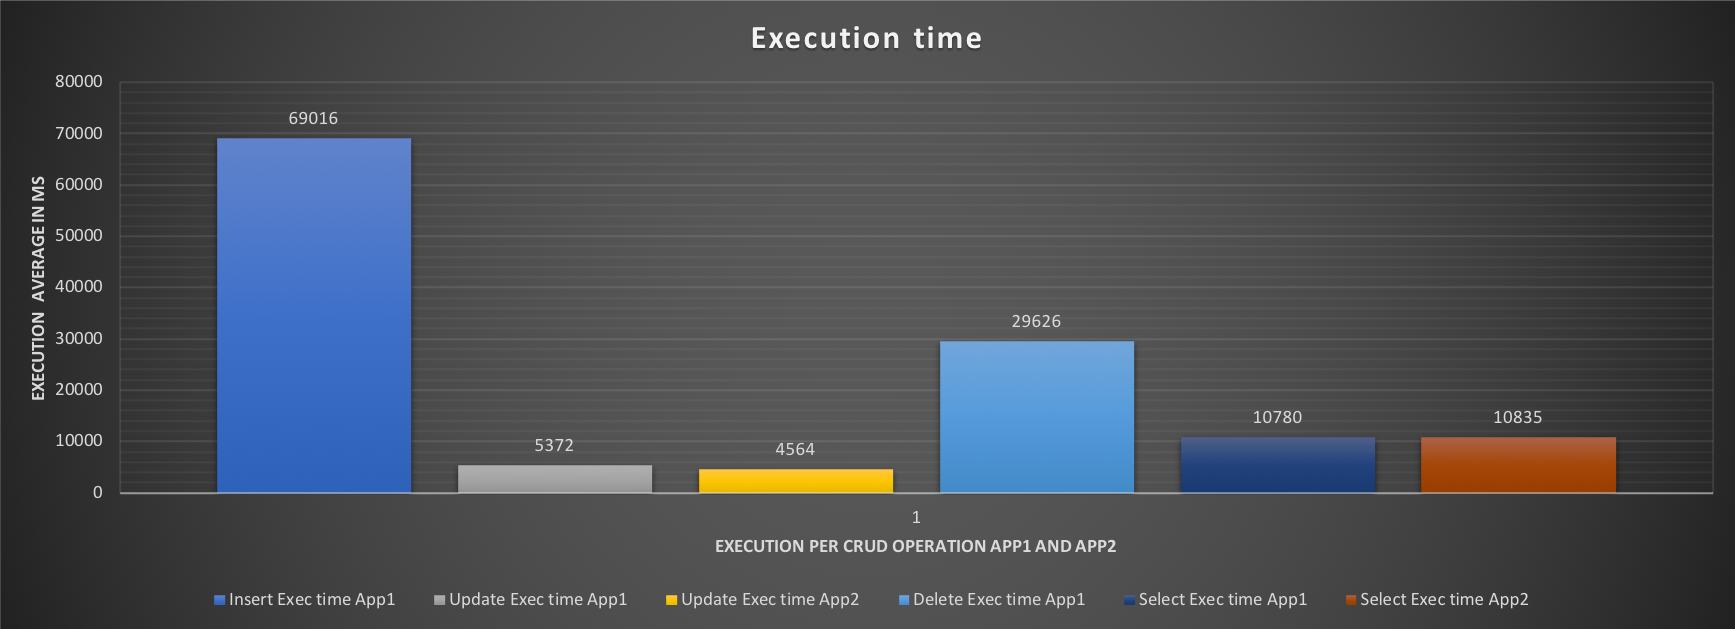 execution_time1